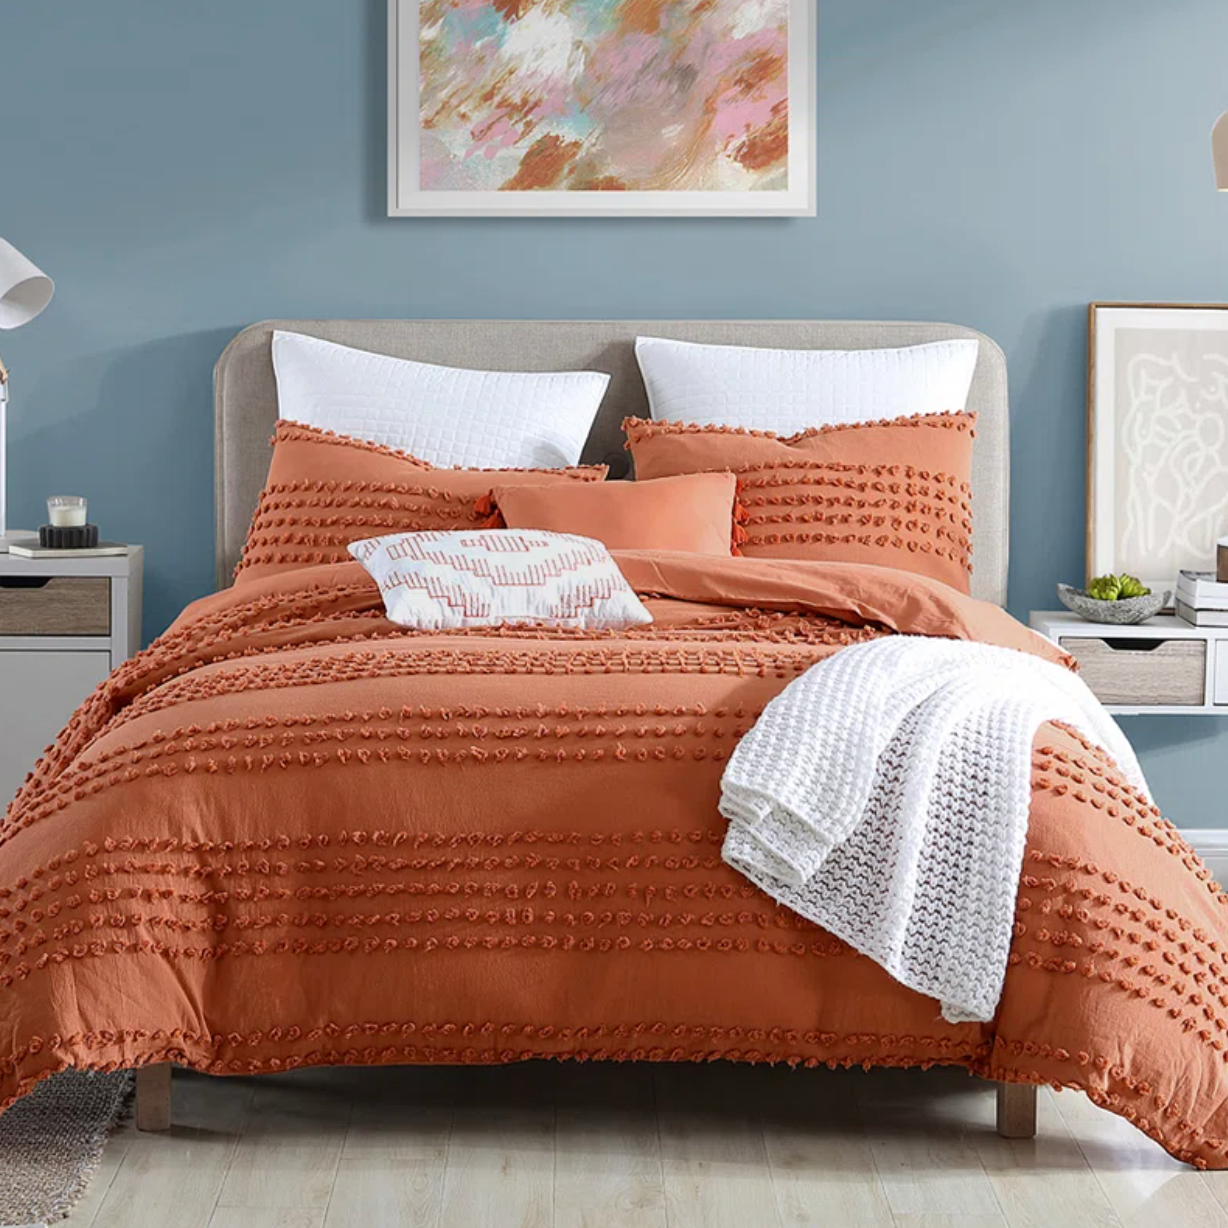 s Latest Sale Includes Bedding for Your Fall Refresh, $8 and Up